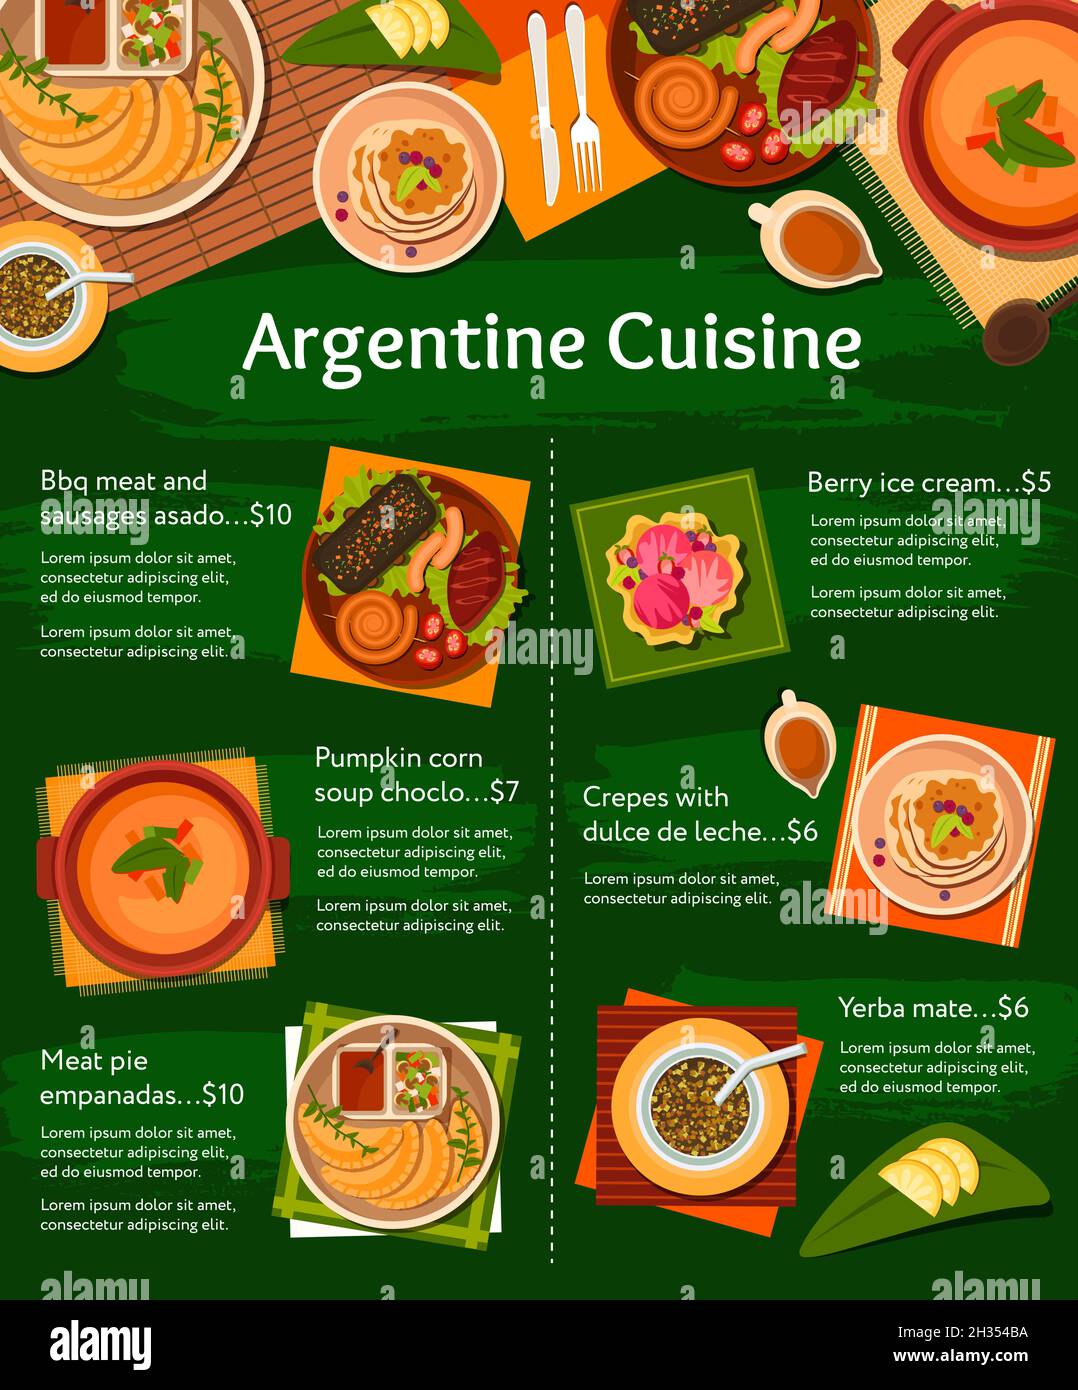 Argentine cuisine vector menu with barbecue meat dishes, vegetable soup and desserts. Bbq chorizo sausages, pork chops and empanada pies, yerba mate, Stock Vector